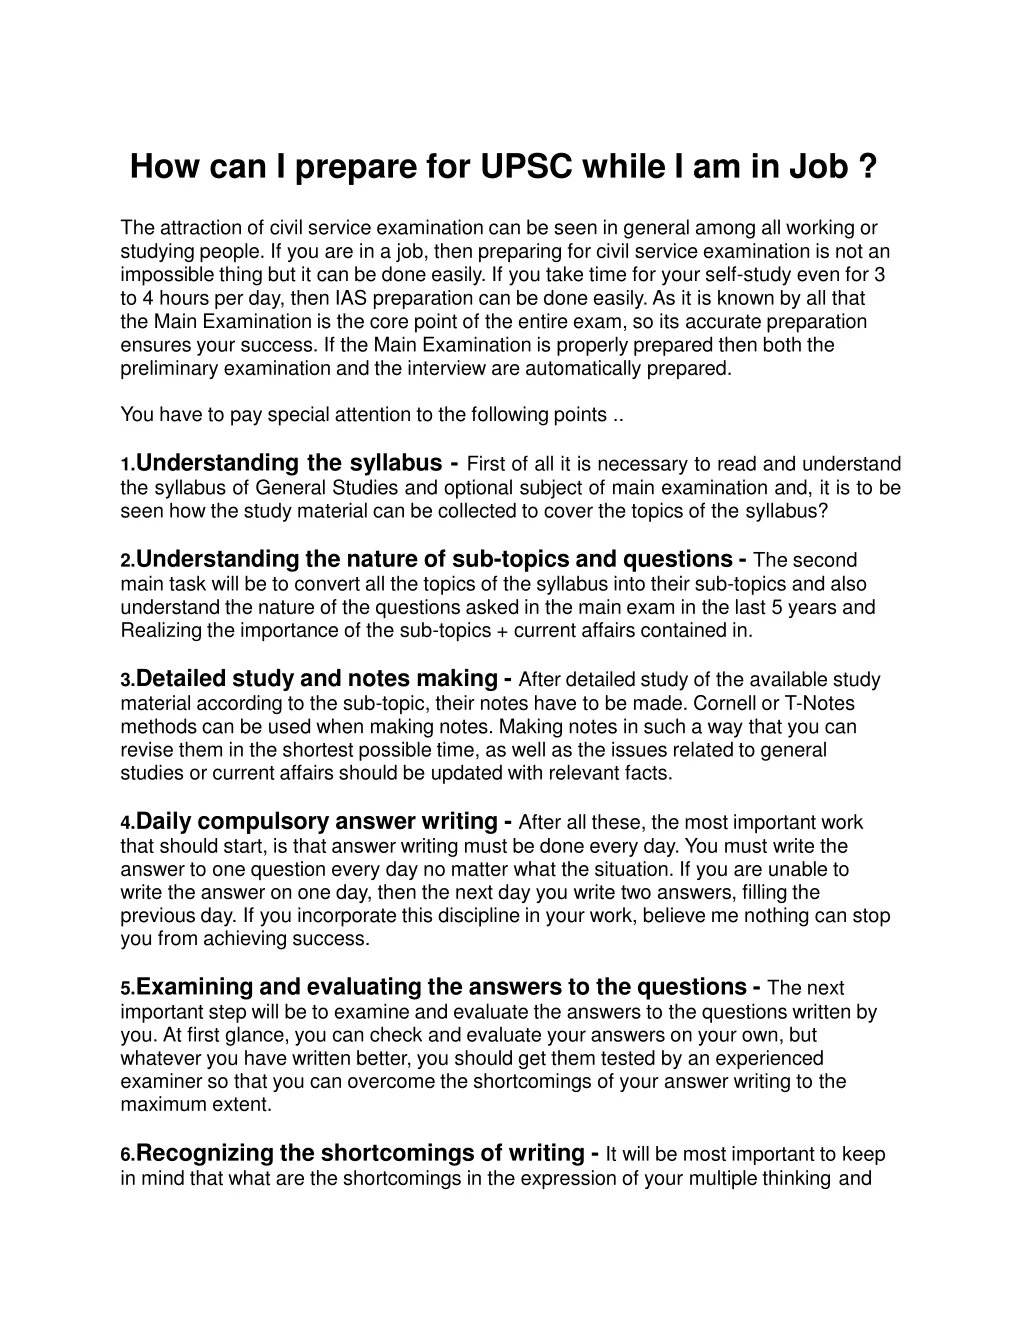 how can i prepare for upsc while